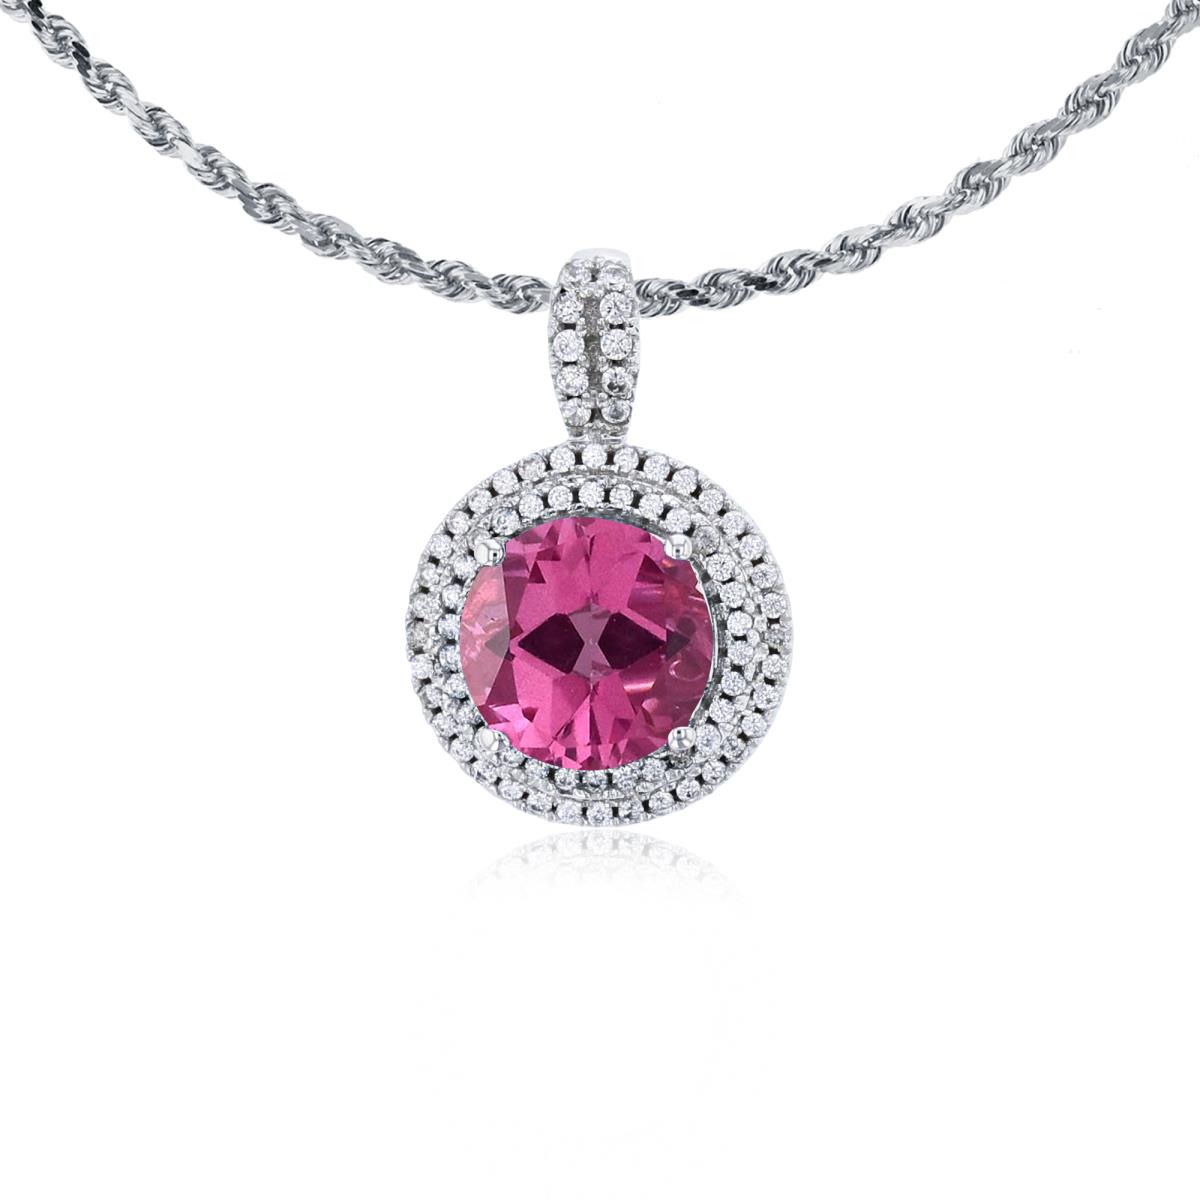 10K White Gold 7mm Round Pure Pink & 0.25 CTTW Diamonds Double Halo 18" Rope Chain Necklace